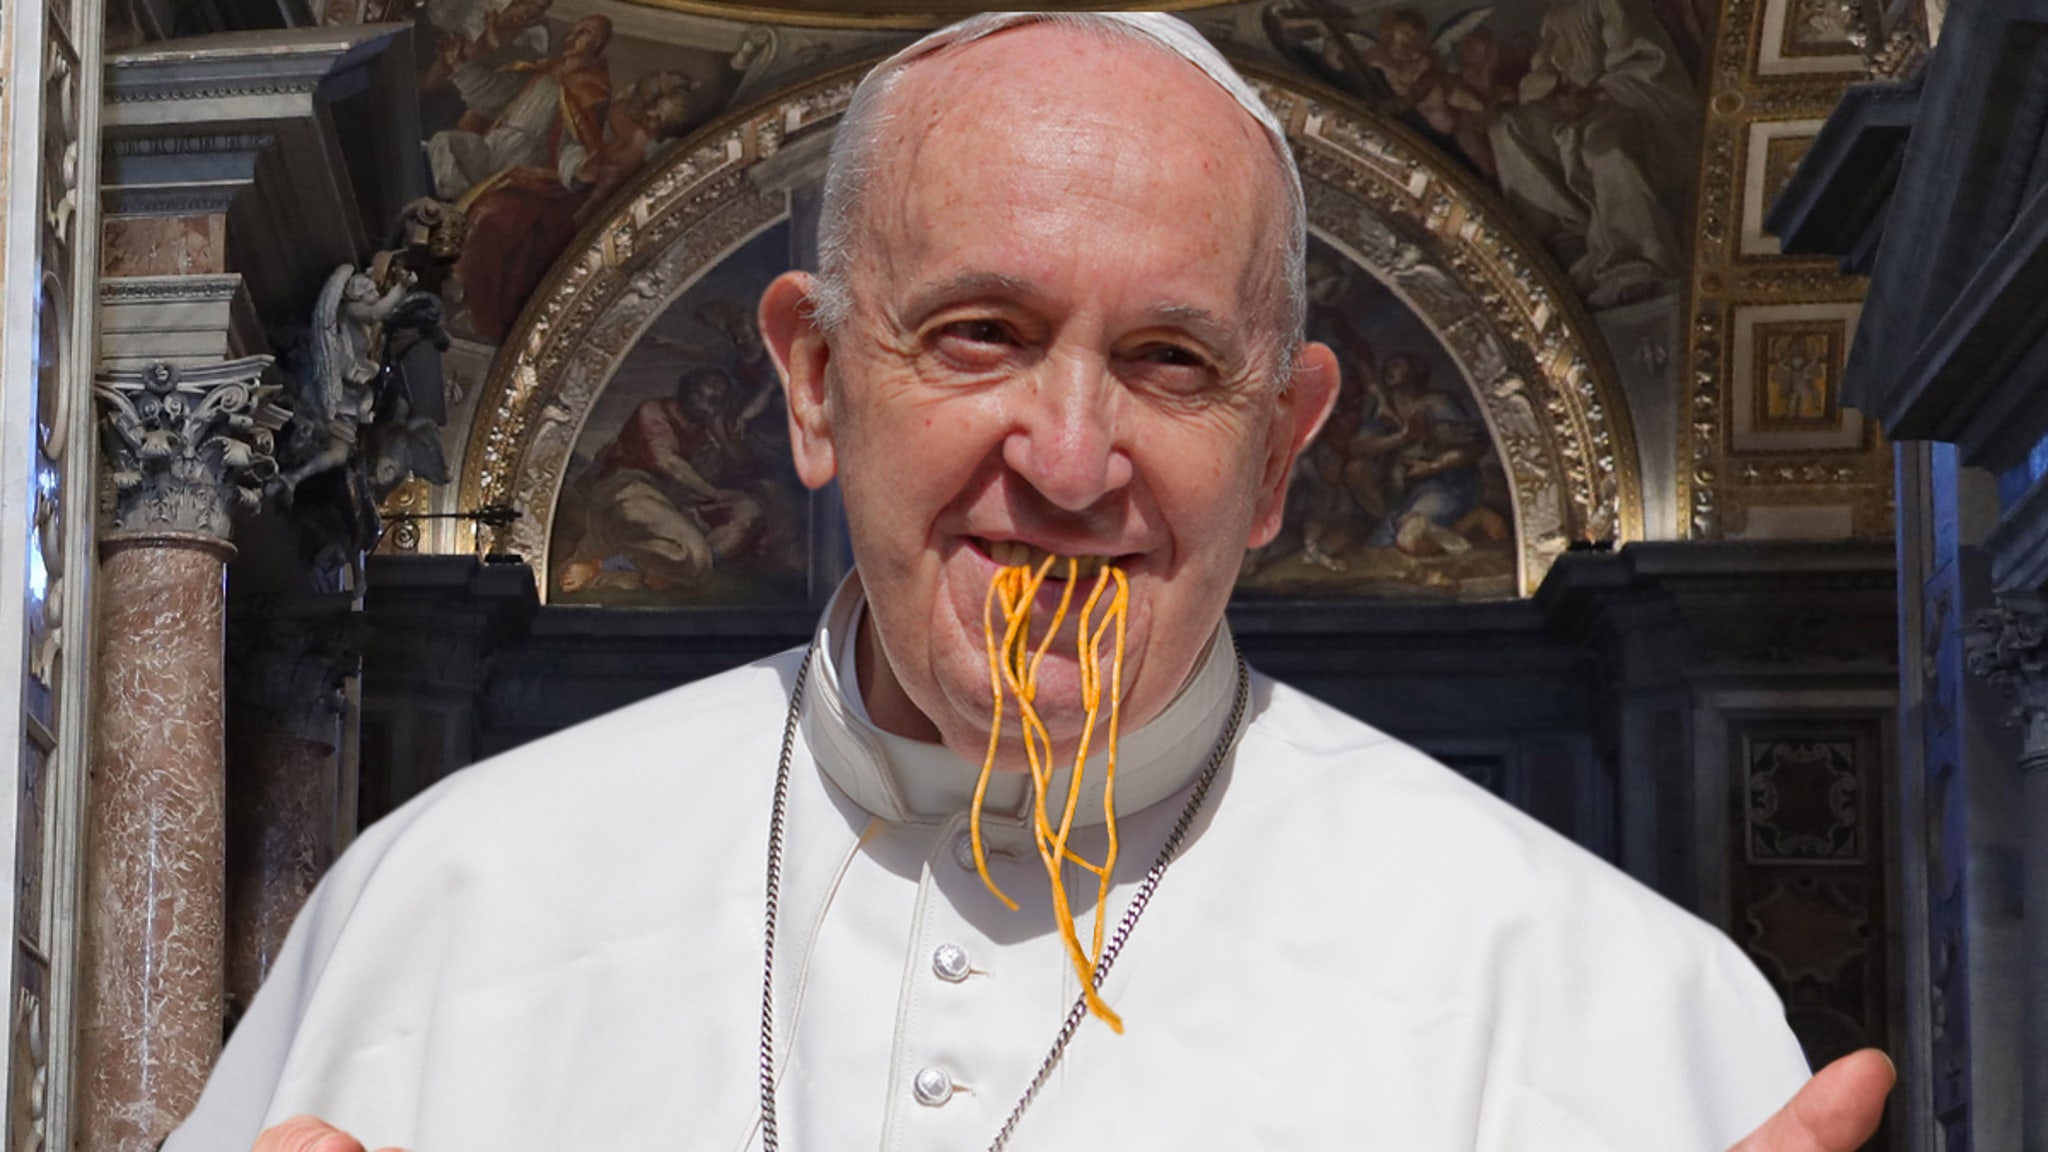 Pope Francis eats too much pasta, needs diet change for sore back